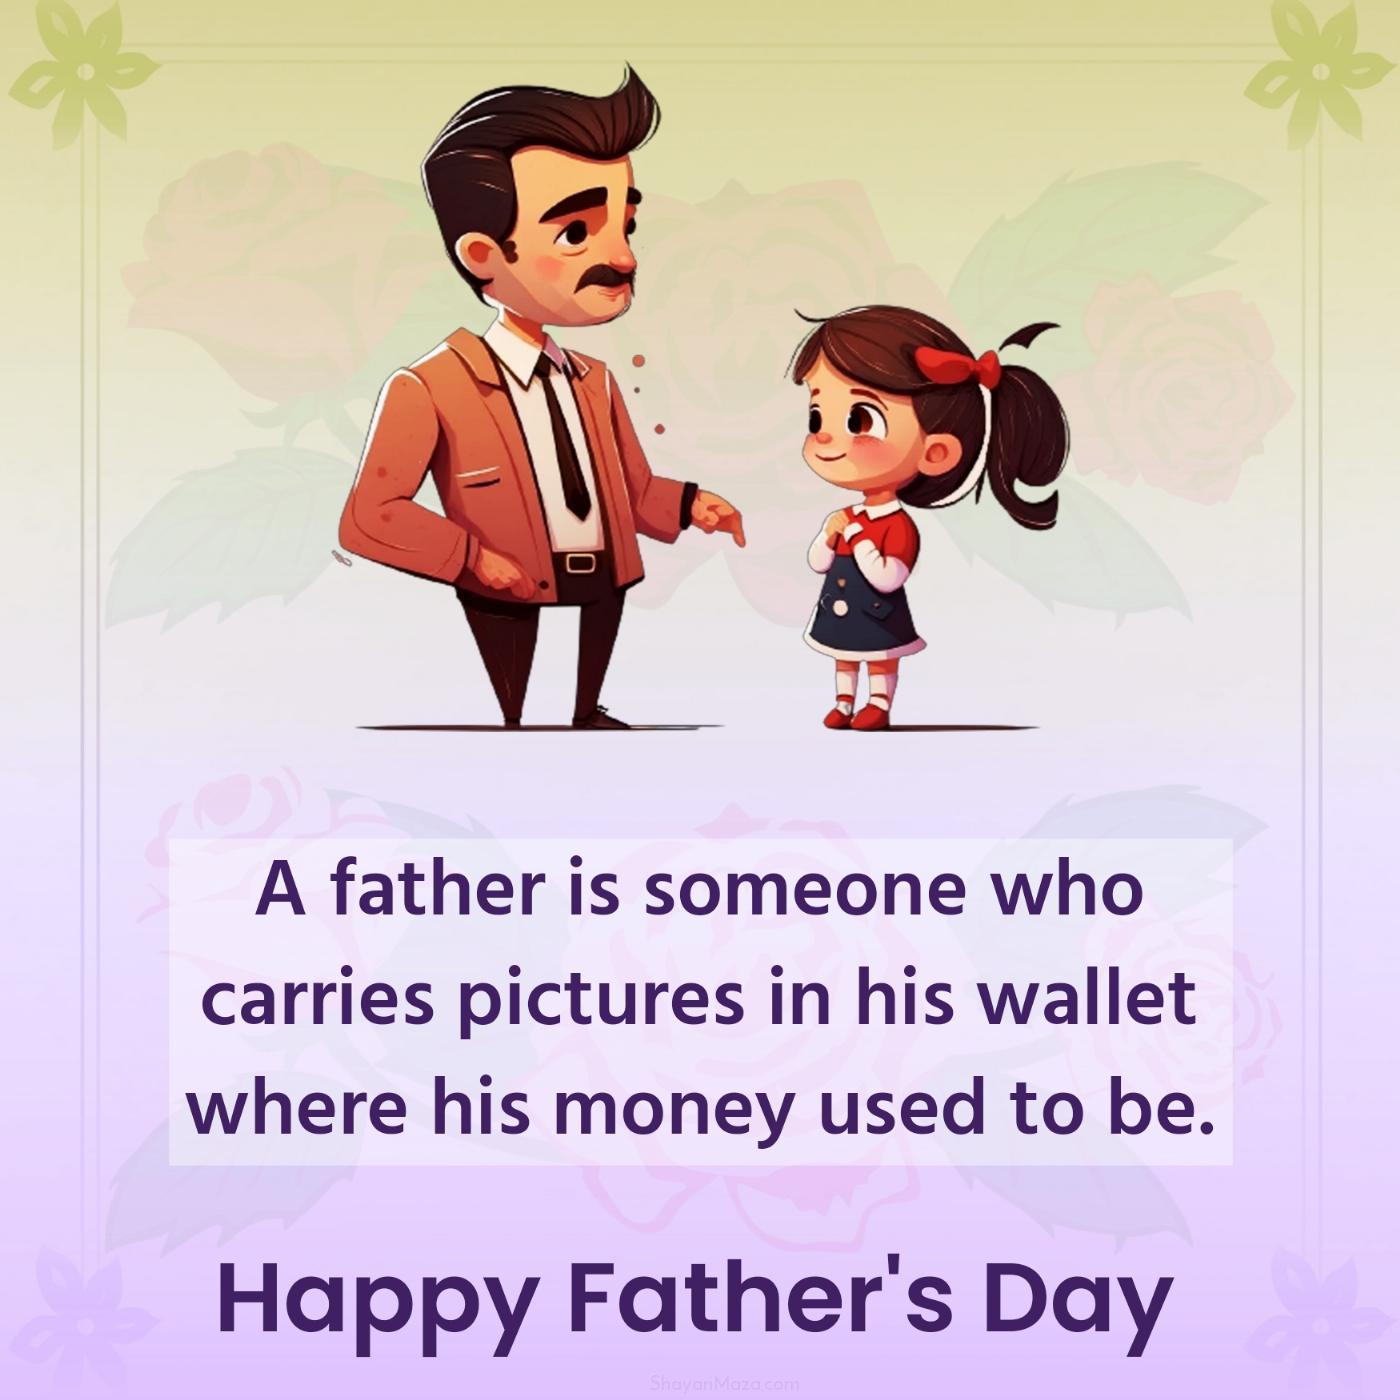 A father is someone who carries pictures in his wallet